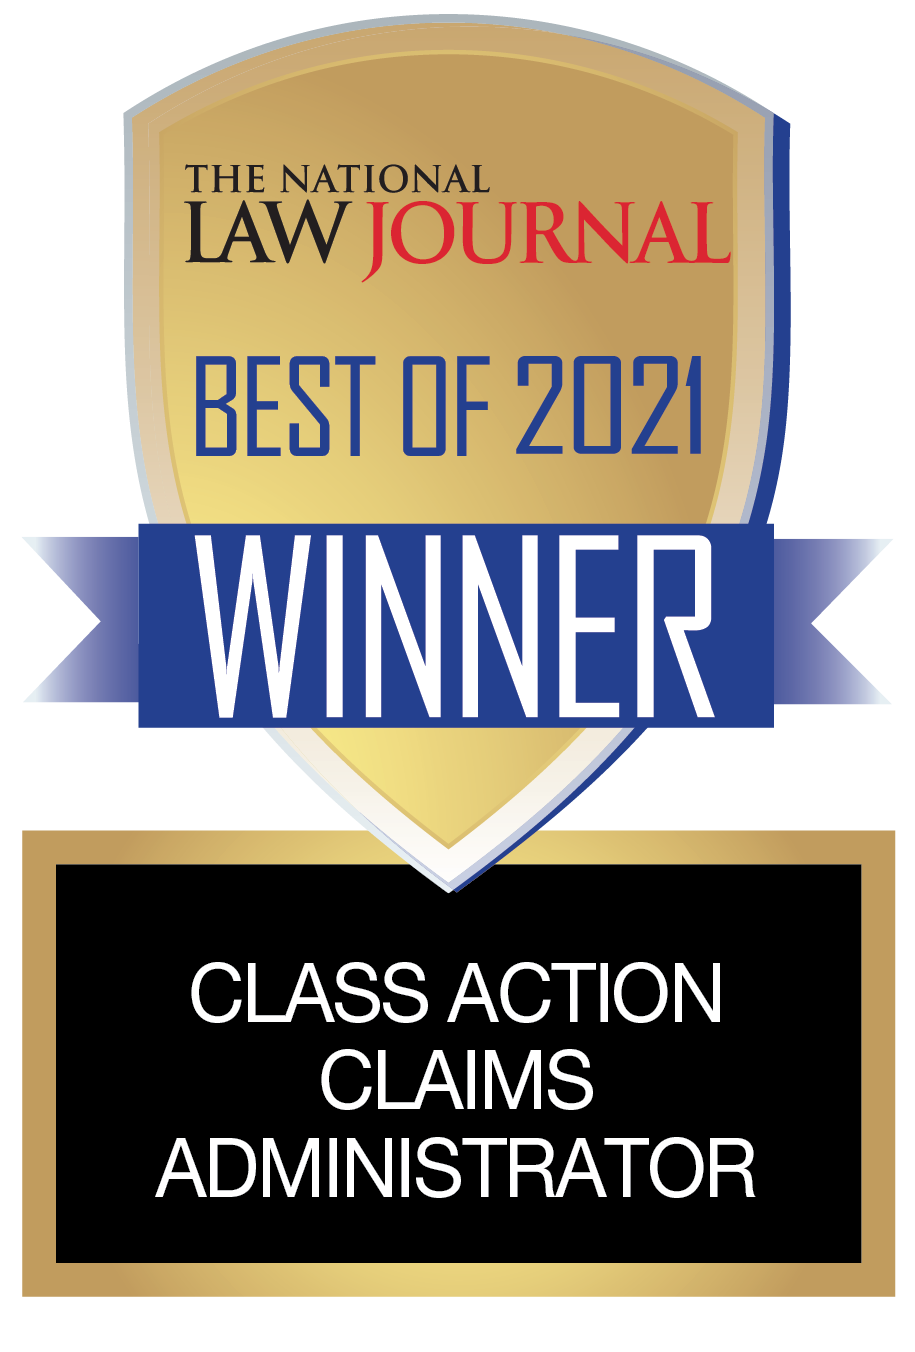 Winner of the National Law Journal 'Best of 2021' for Class Action Claims Administration